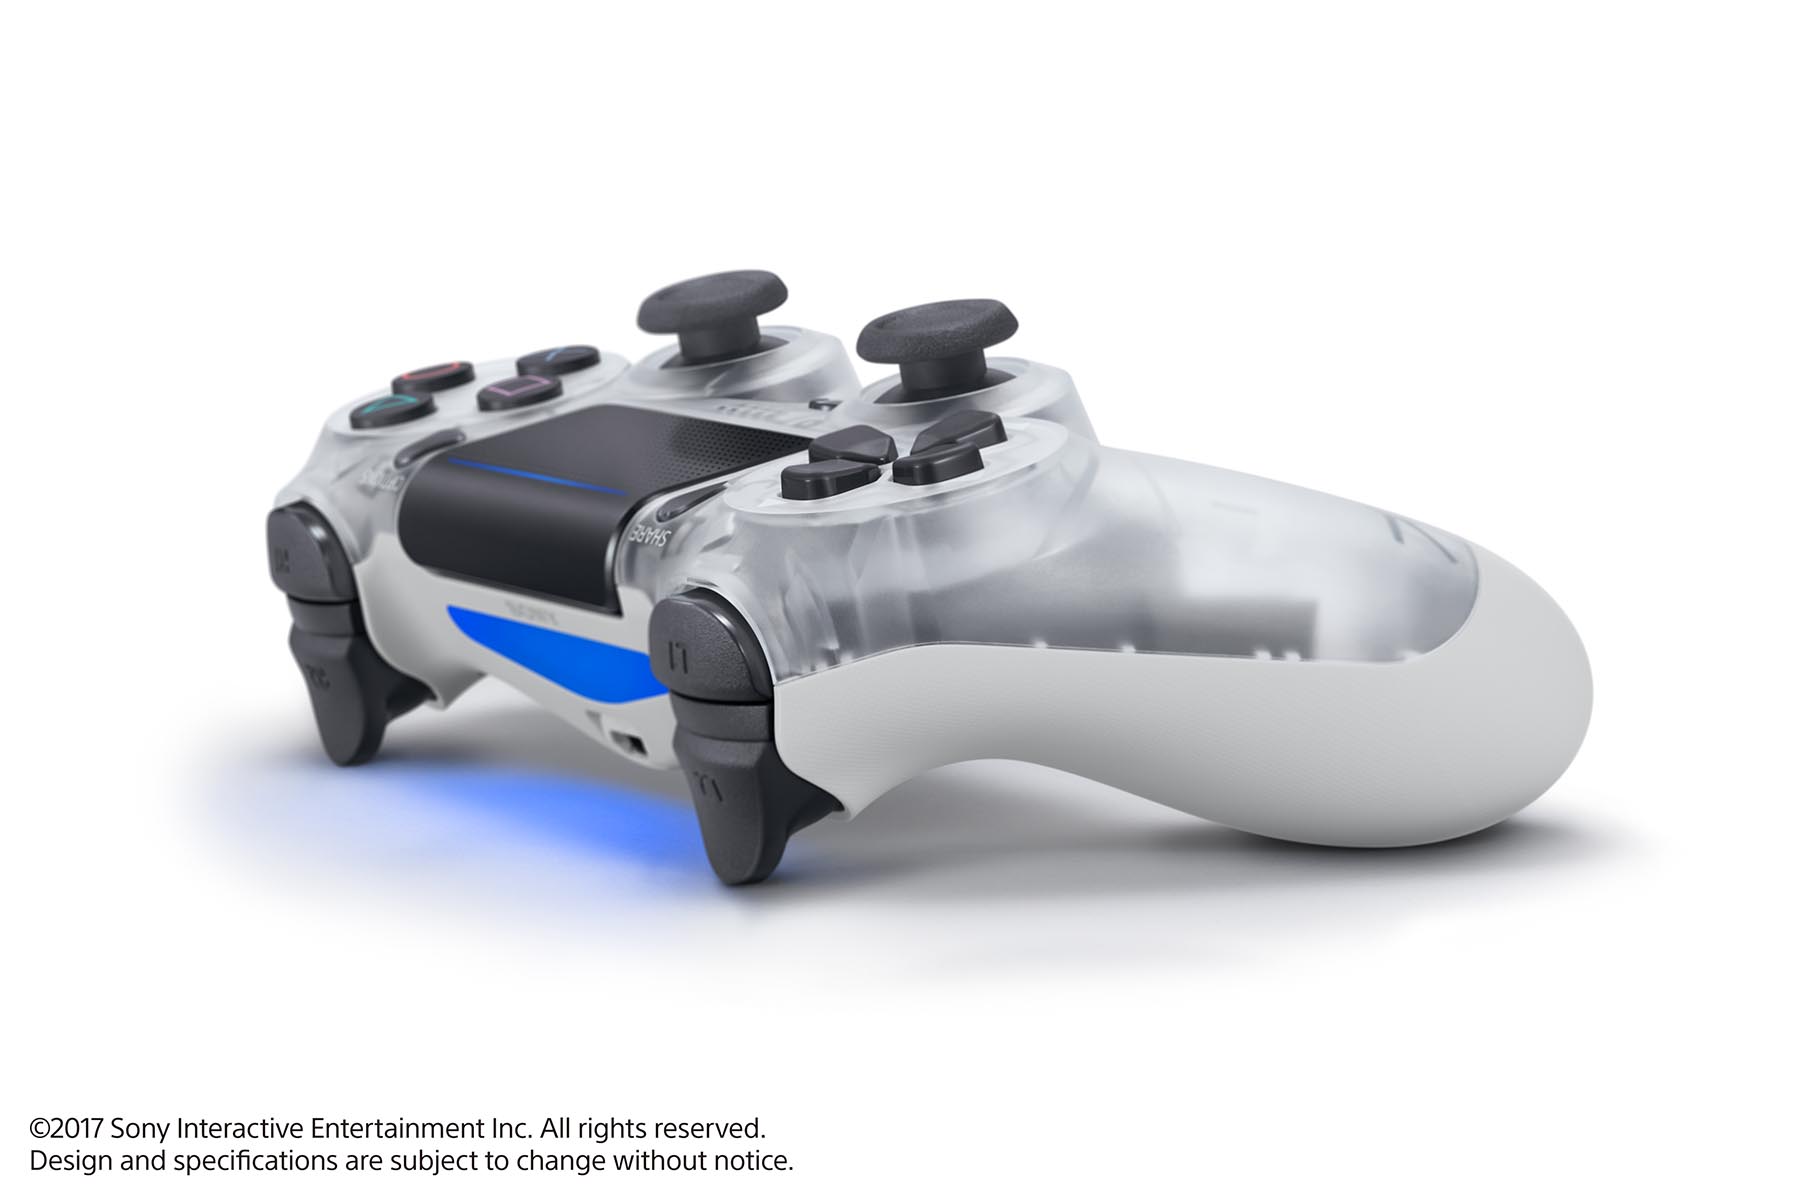 Sony DualShock 4 PlayStation Wireless Controller - image 3 of 4